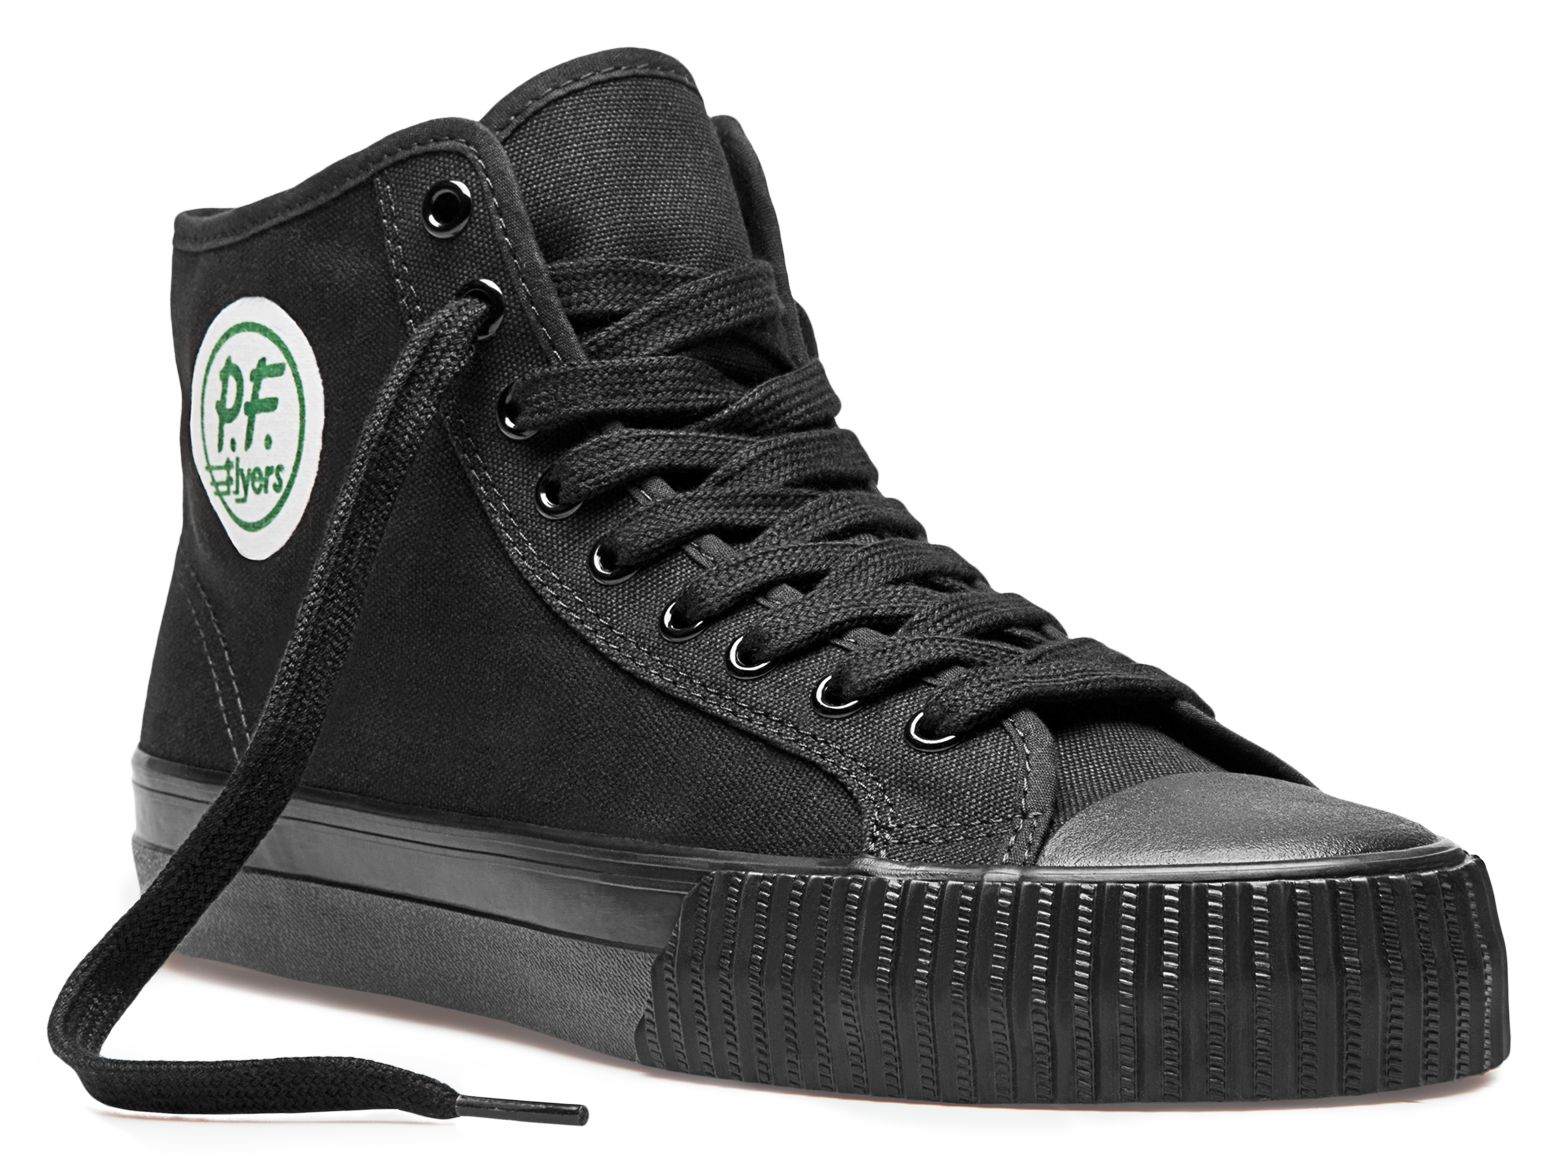 The PF Flyers that Benny 